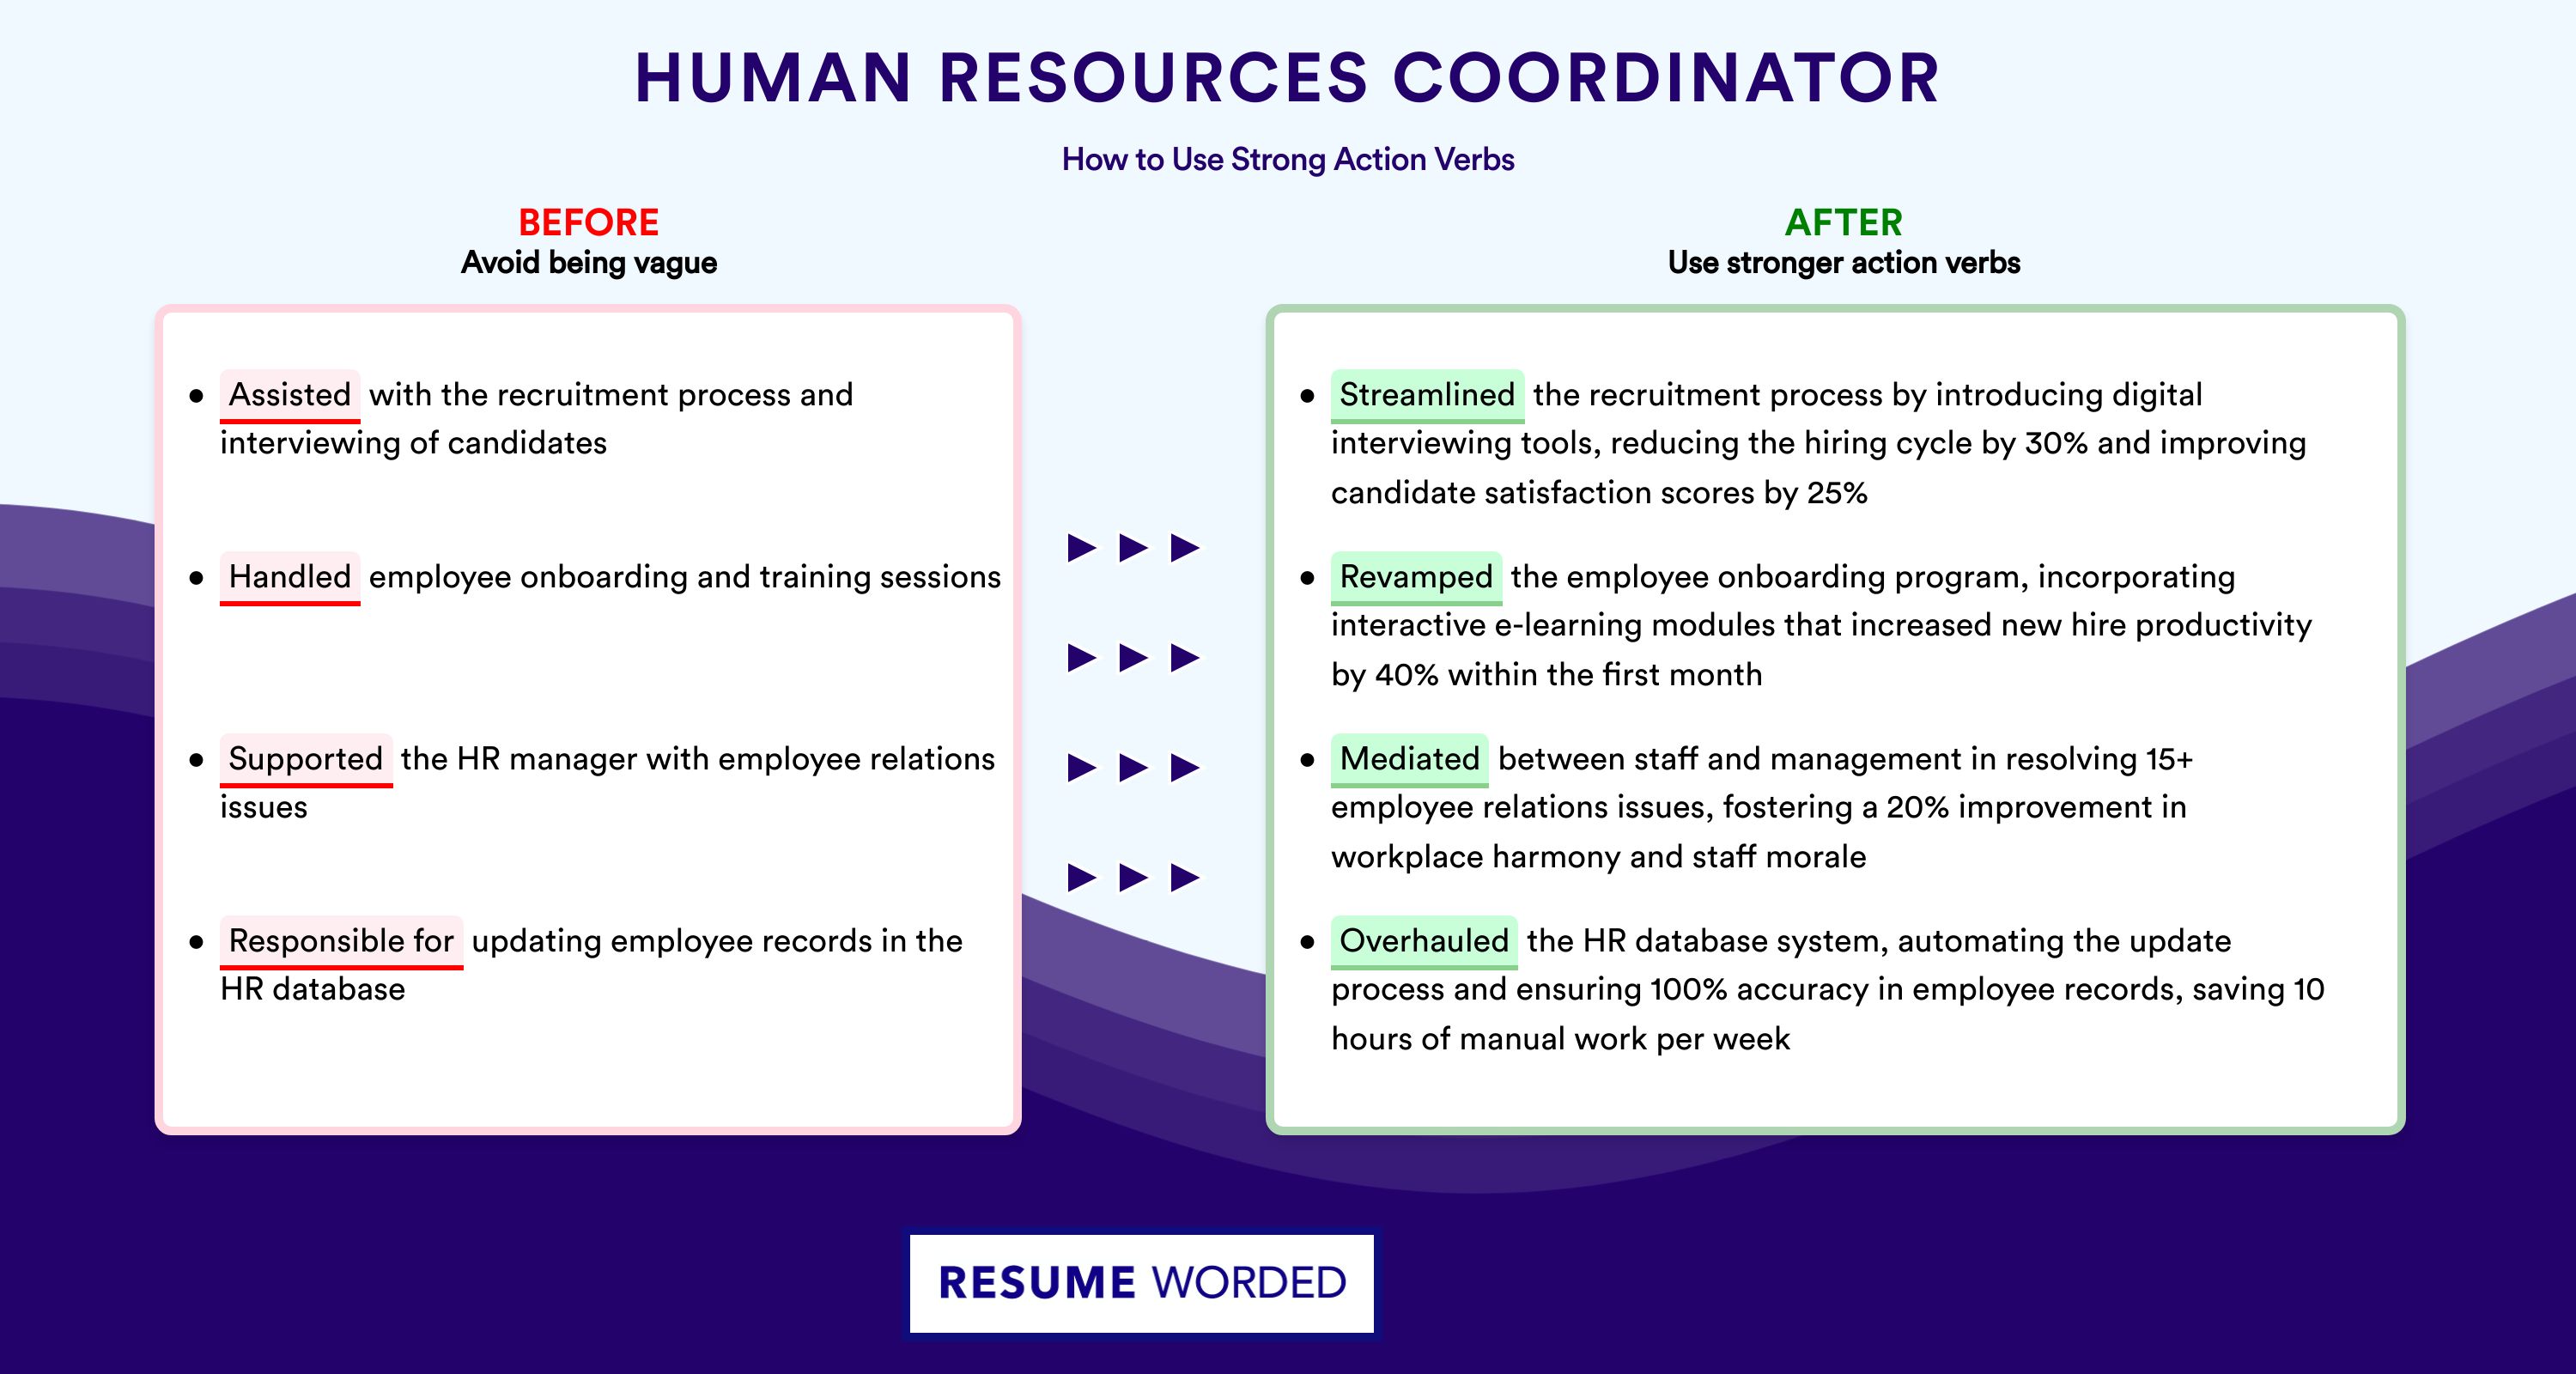 Action Verbs for Human Resources Coordinator